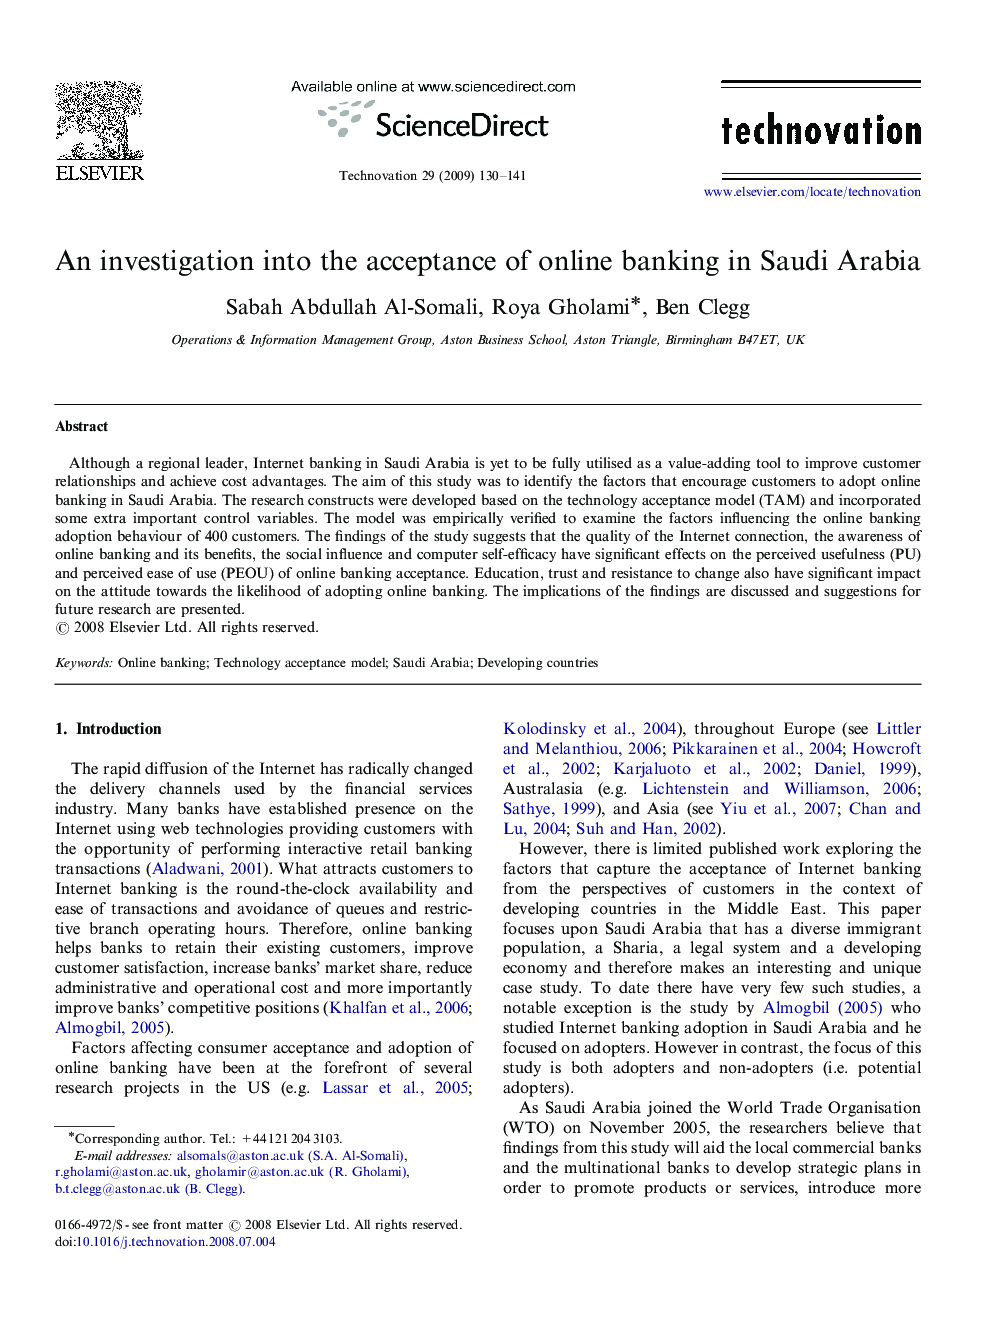 An investigation into the acceptance of online banking in Saudi Arabia